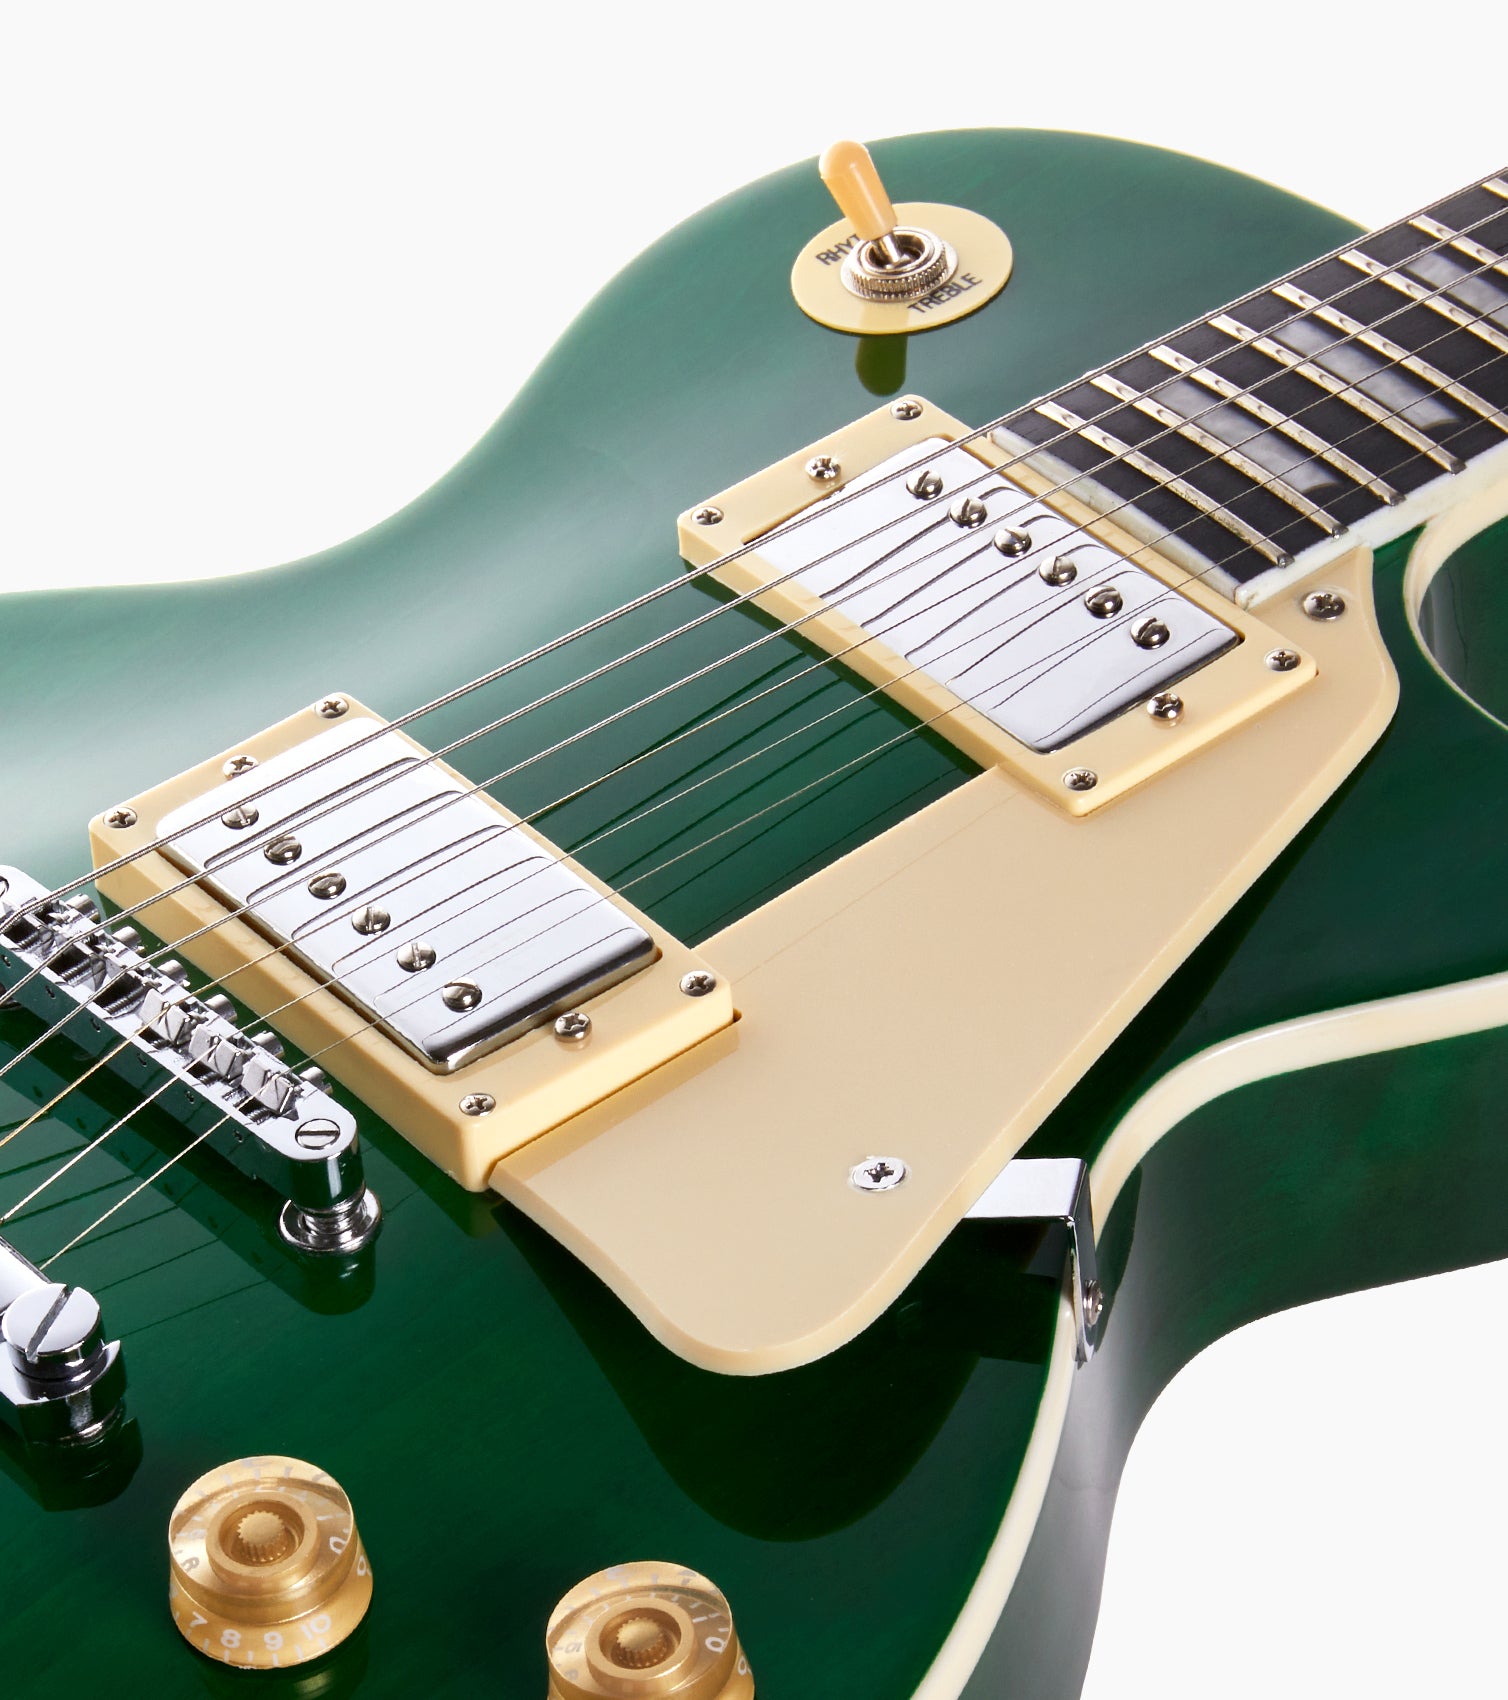 close-up of Green les paul inspired electric guitar strings